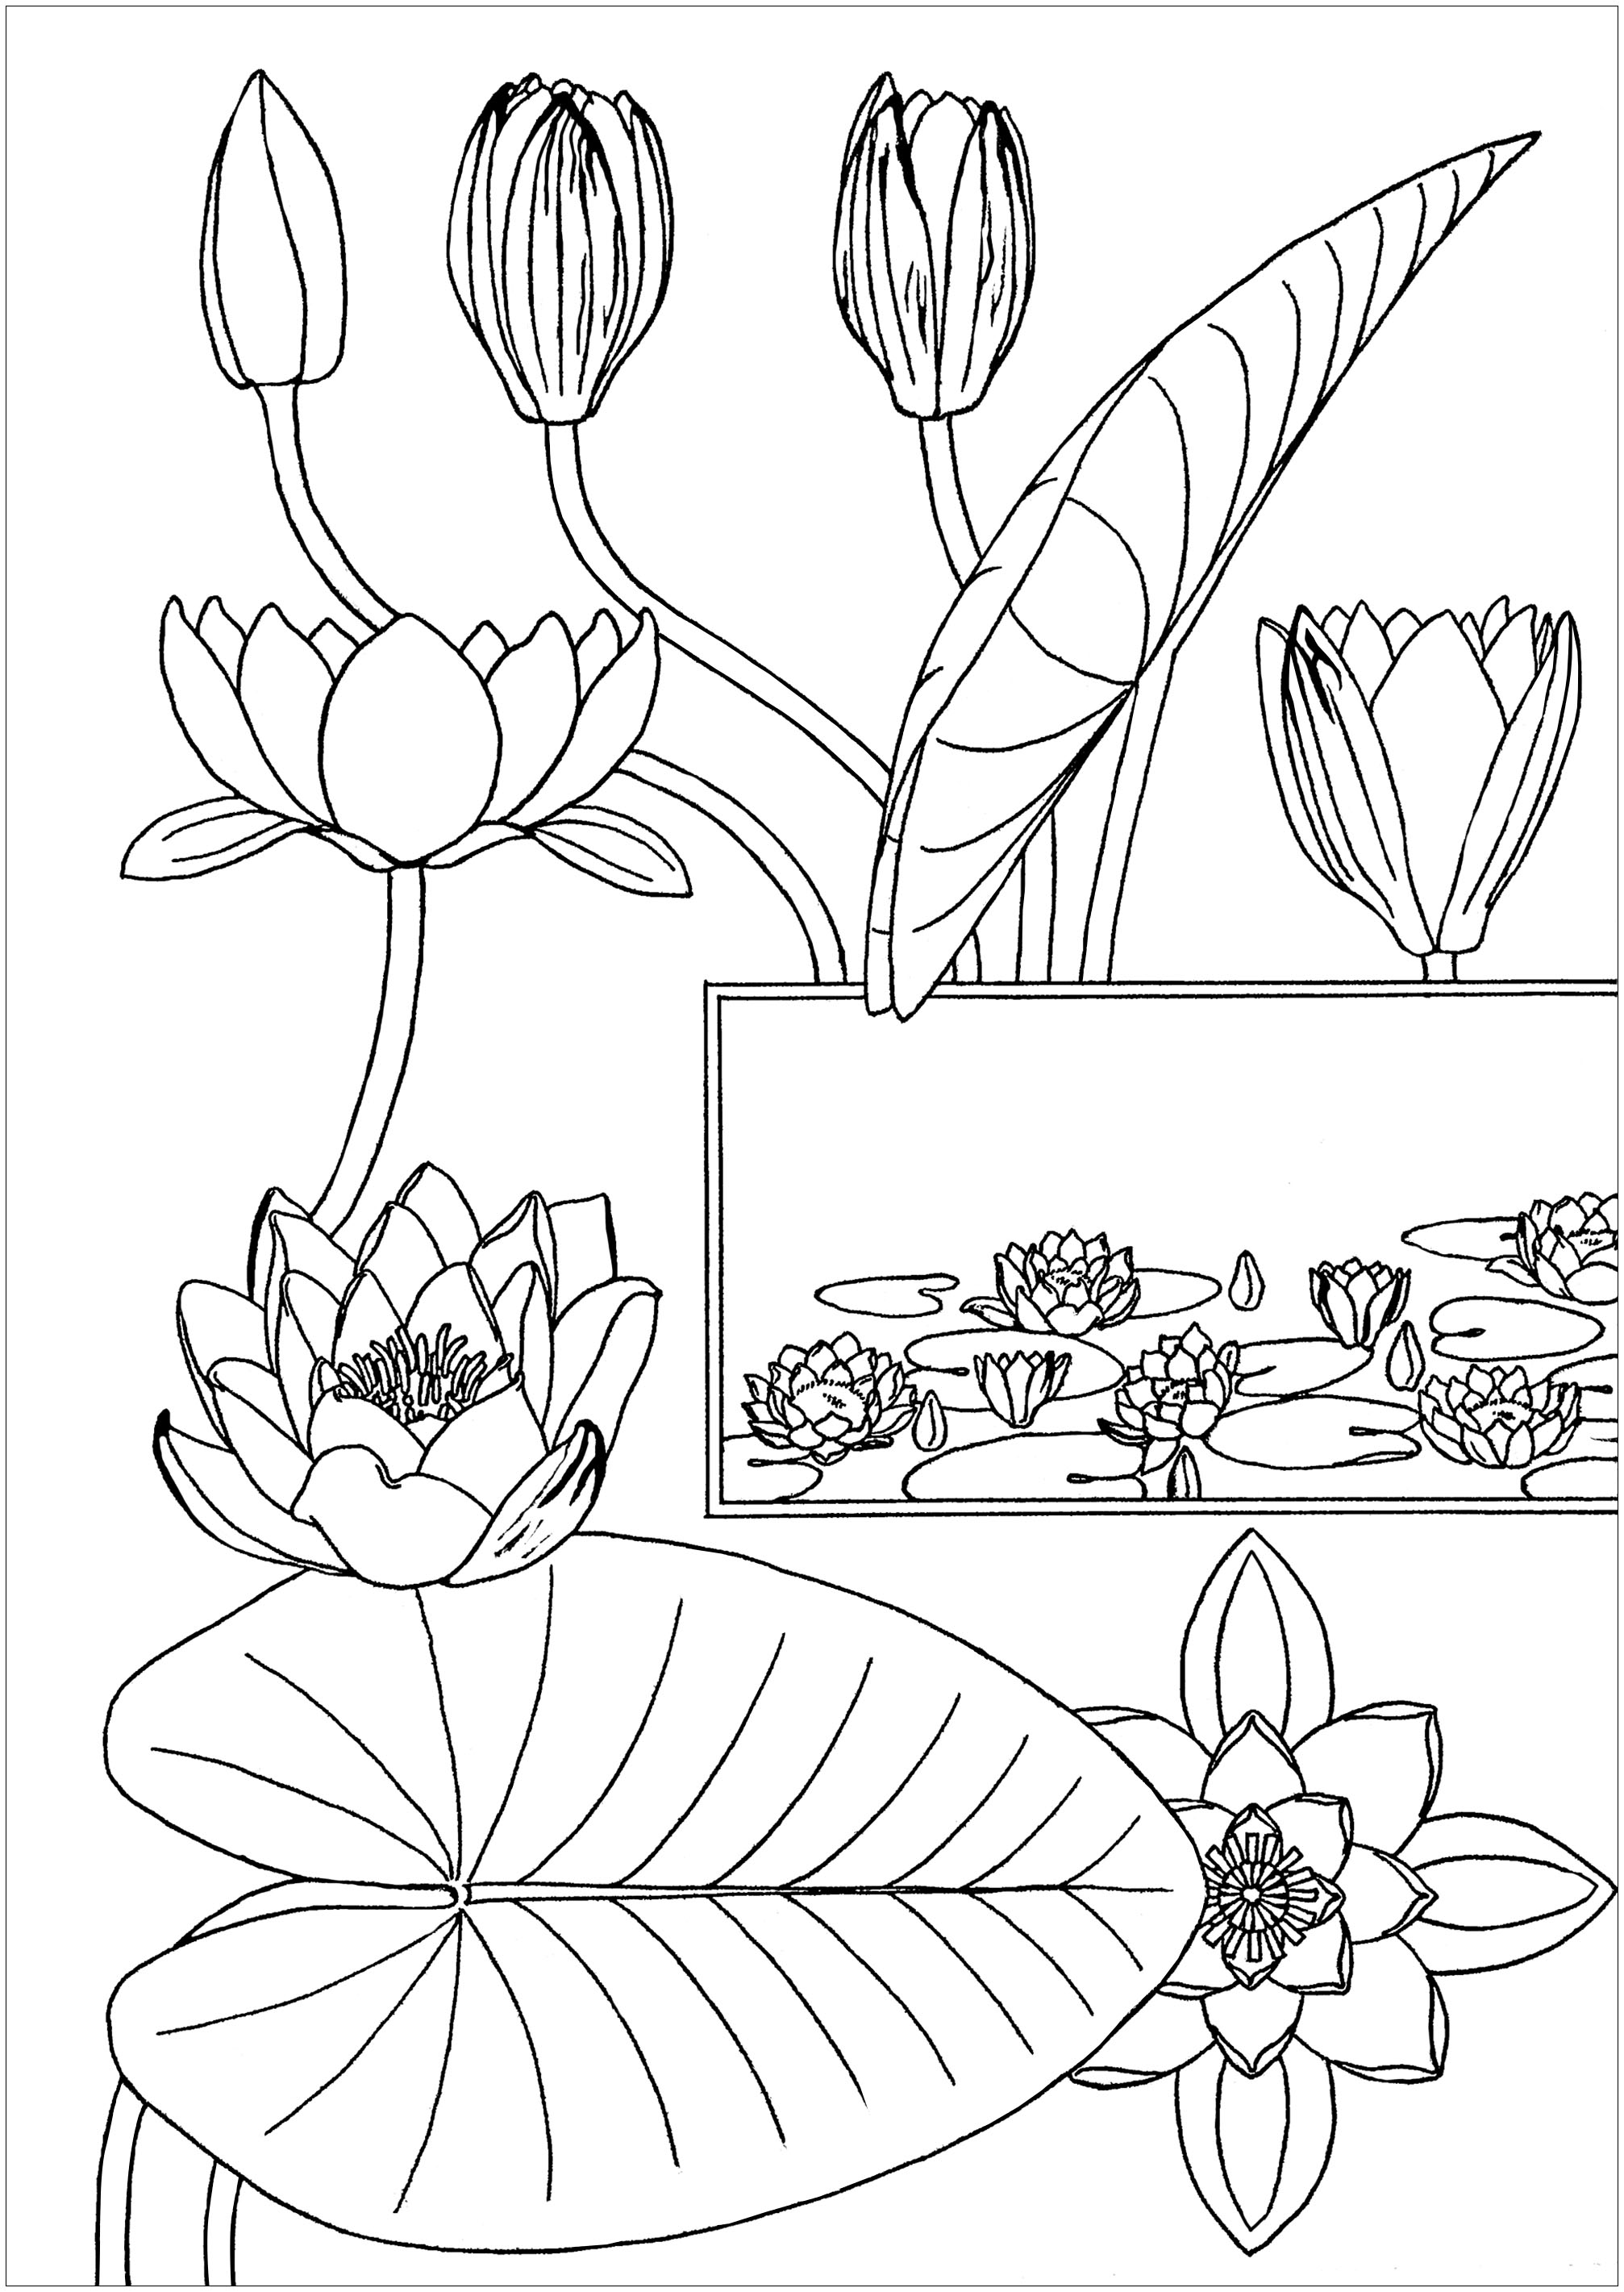 Coloring page created from an illustration by Eugene Grasset : Nénuphar (Water-Lily) (1869), Artist : Olivier